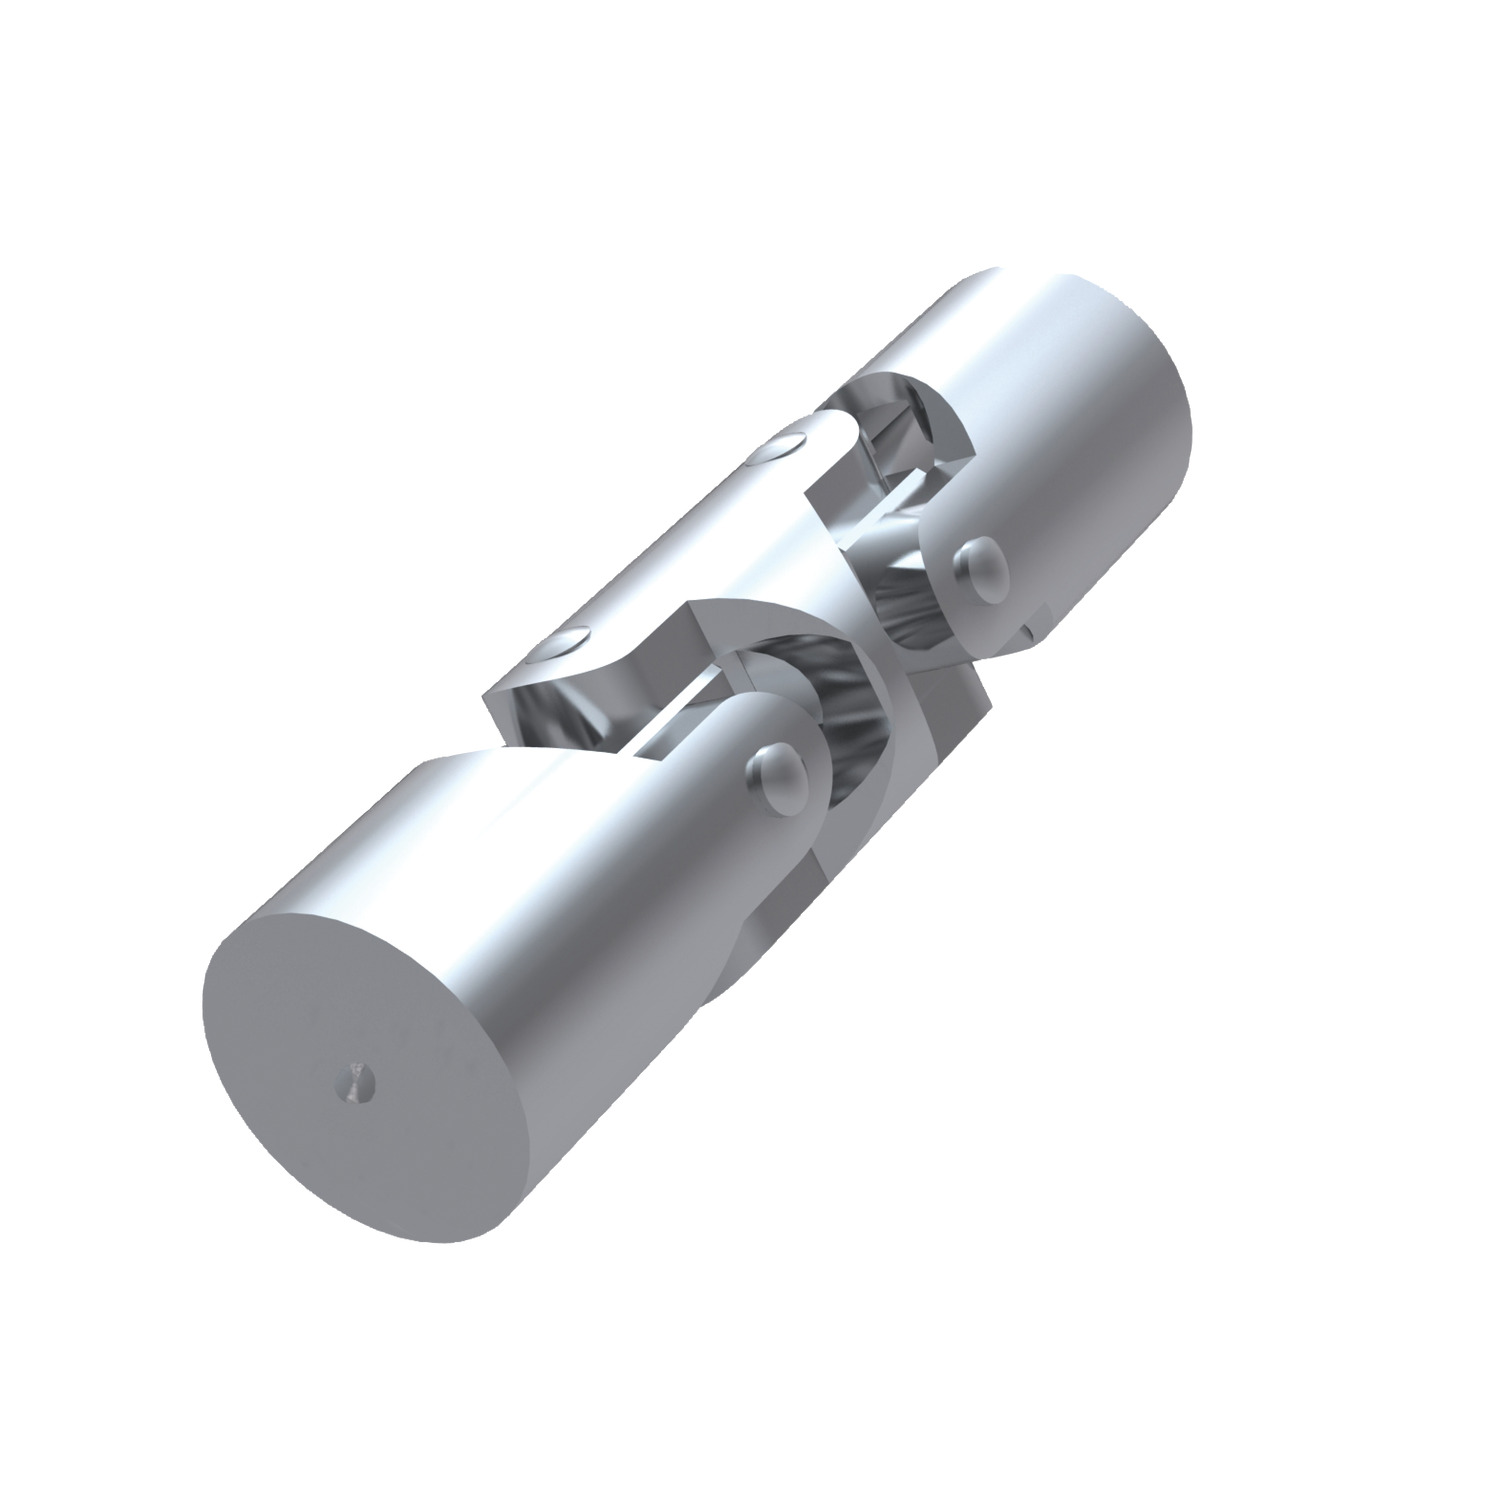 Double Universal Joint Solid end double universal joints allow the end user to either weld to existing shafts or bore out to exact requirements.